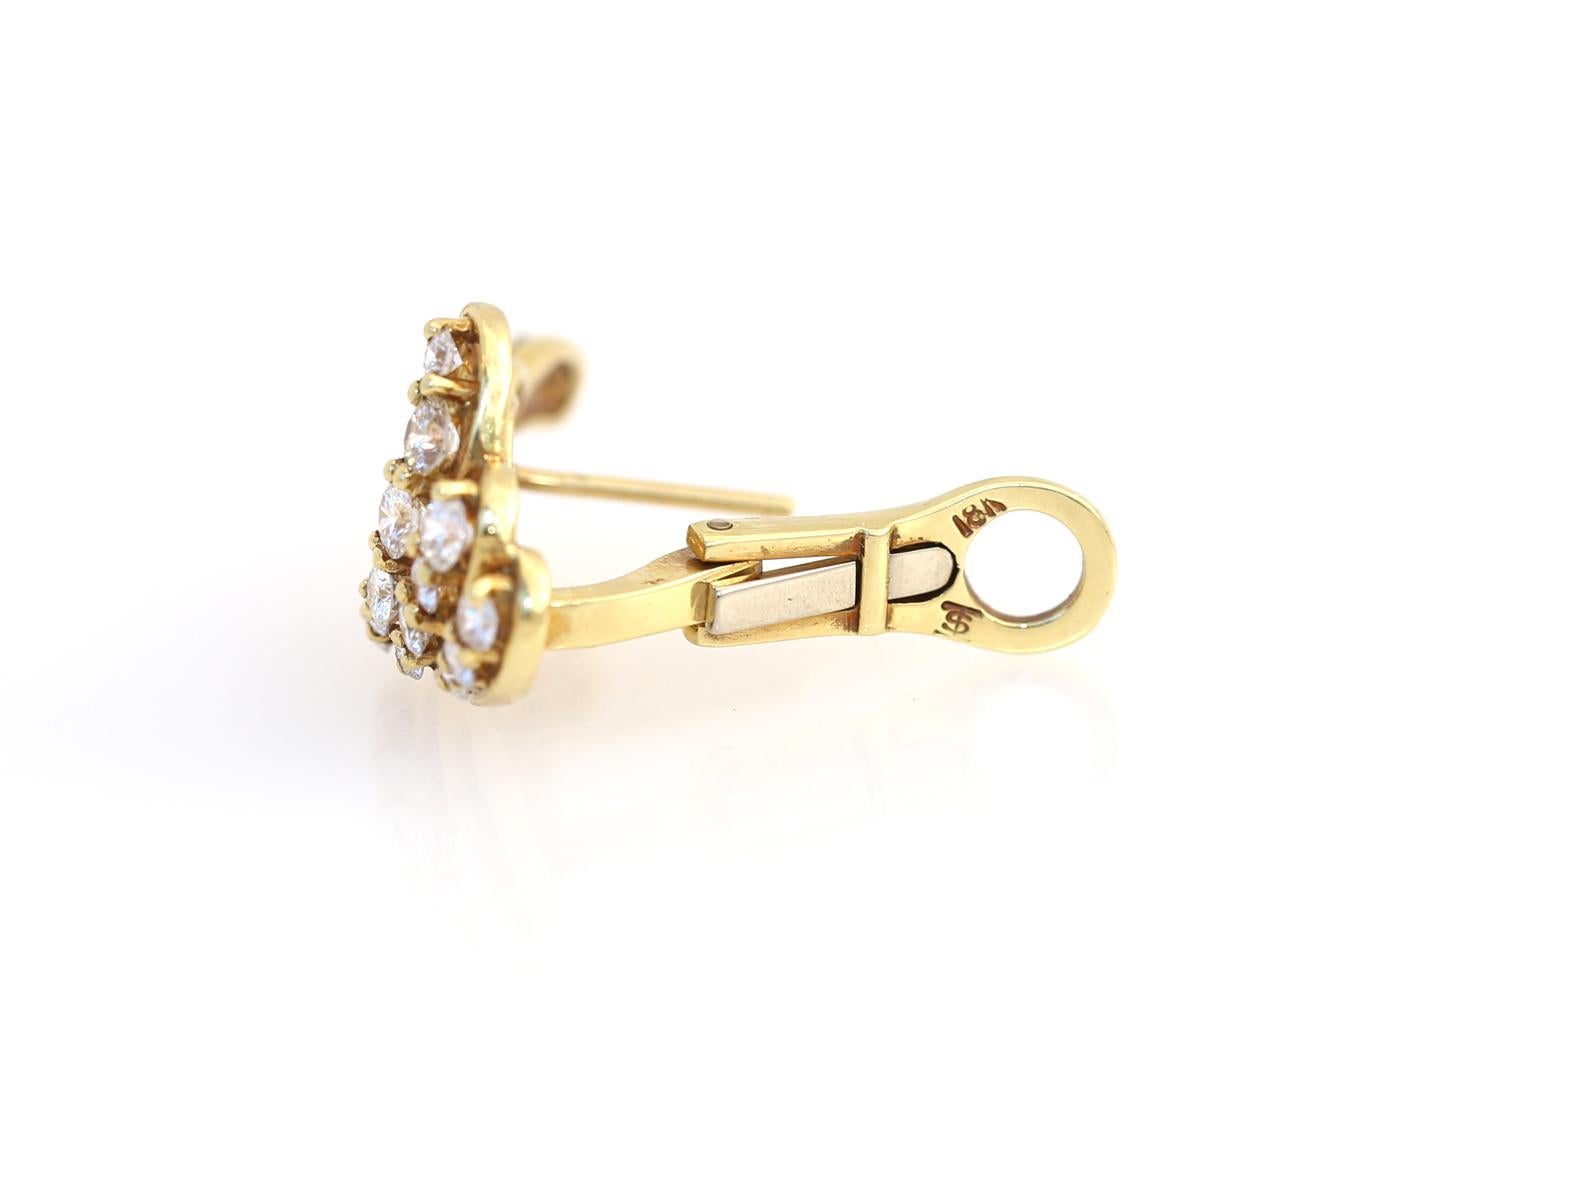 Round Cut Diamond Earclips 4.3 Carat 18k Yellow Gold, 1970 For Sale